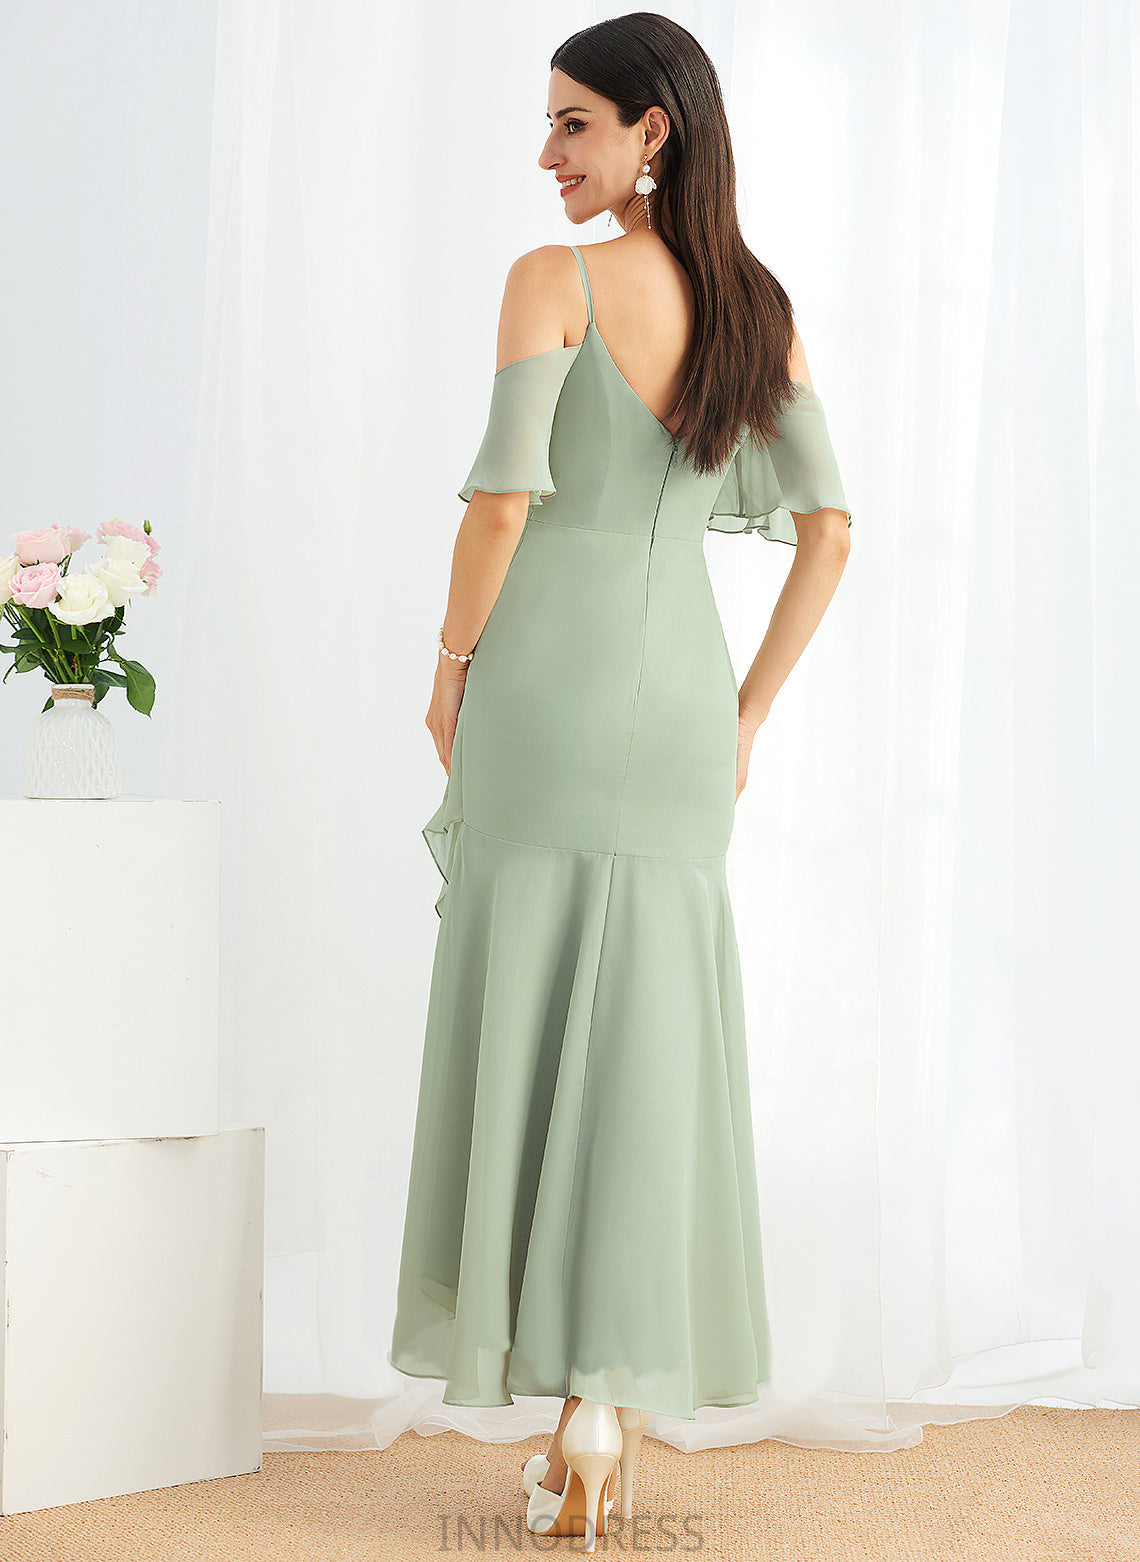 V-neck Ruffle Cocktail Asymmetrical Cocktail Dresses Trumpet/Mermaid Chiffon With Dress Laney